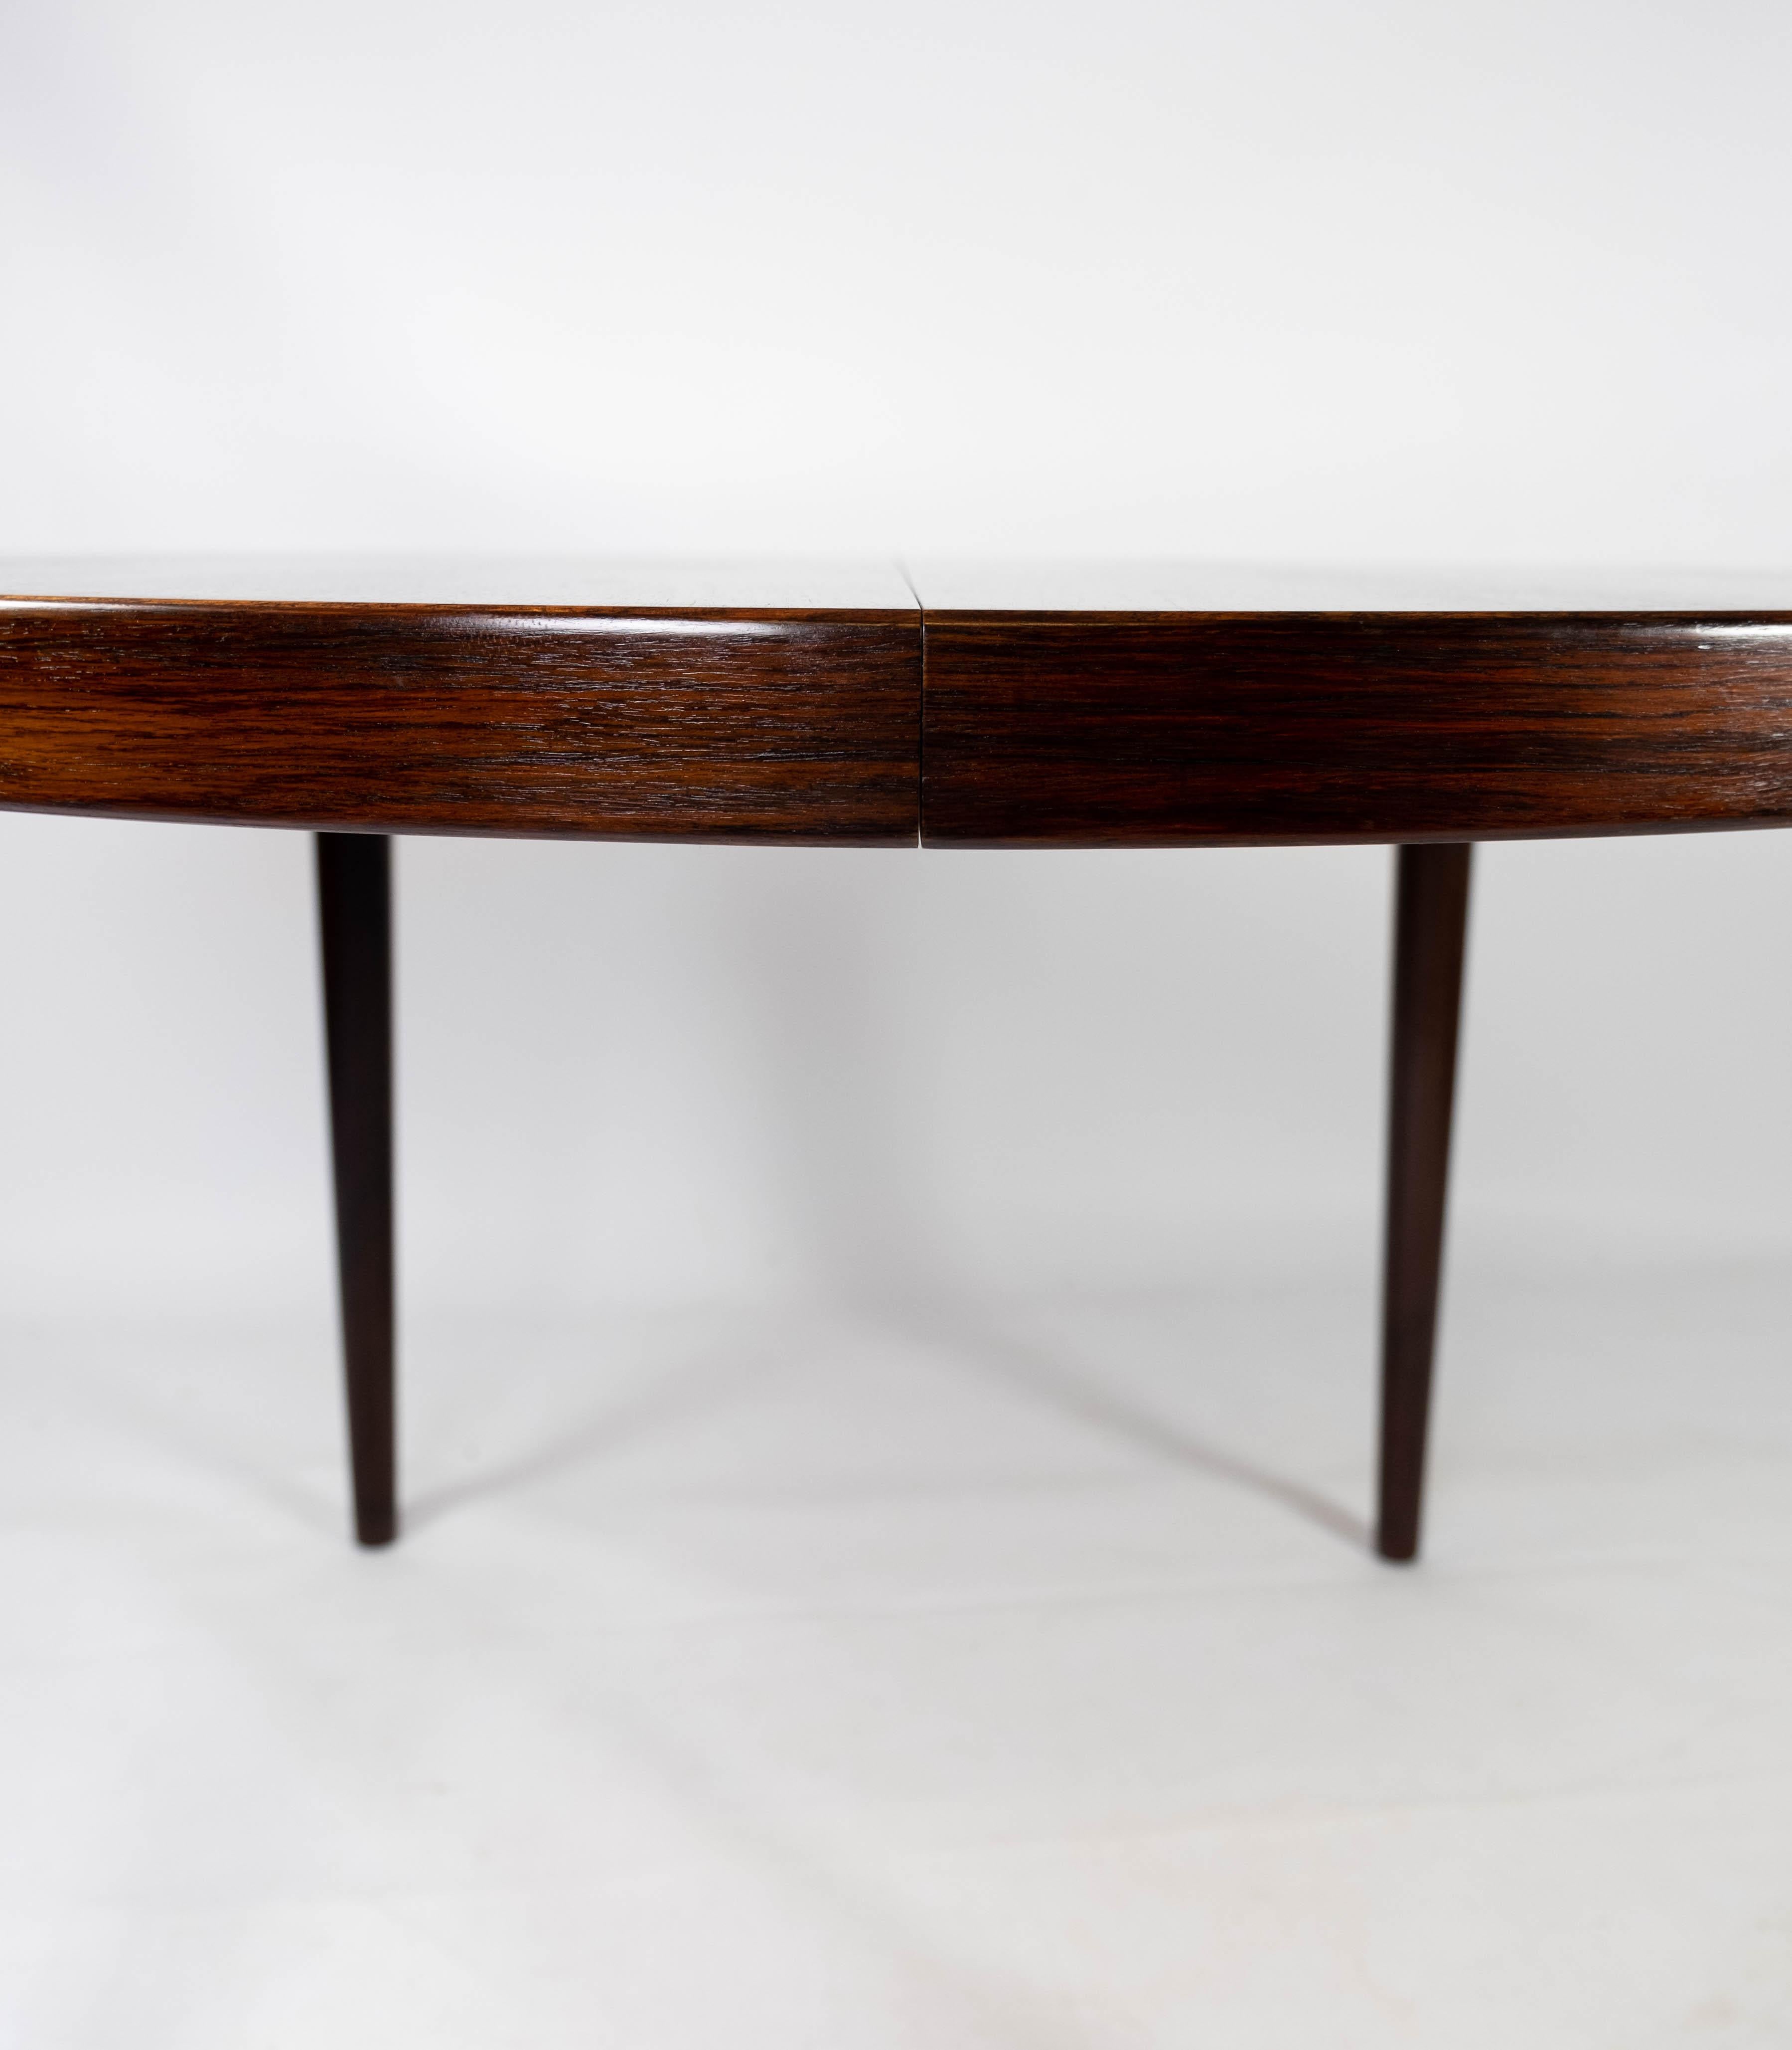 Scandinavian Modern Dining Table in Rosewood with Two Extension Plates, by Omann Junior, 1960s